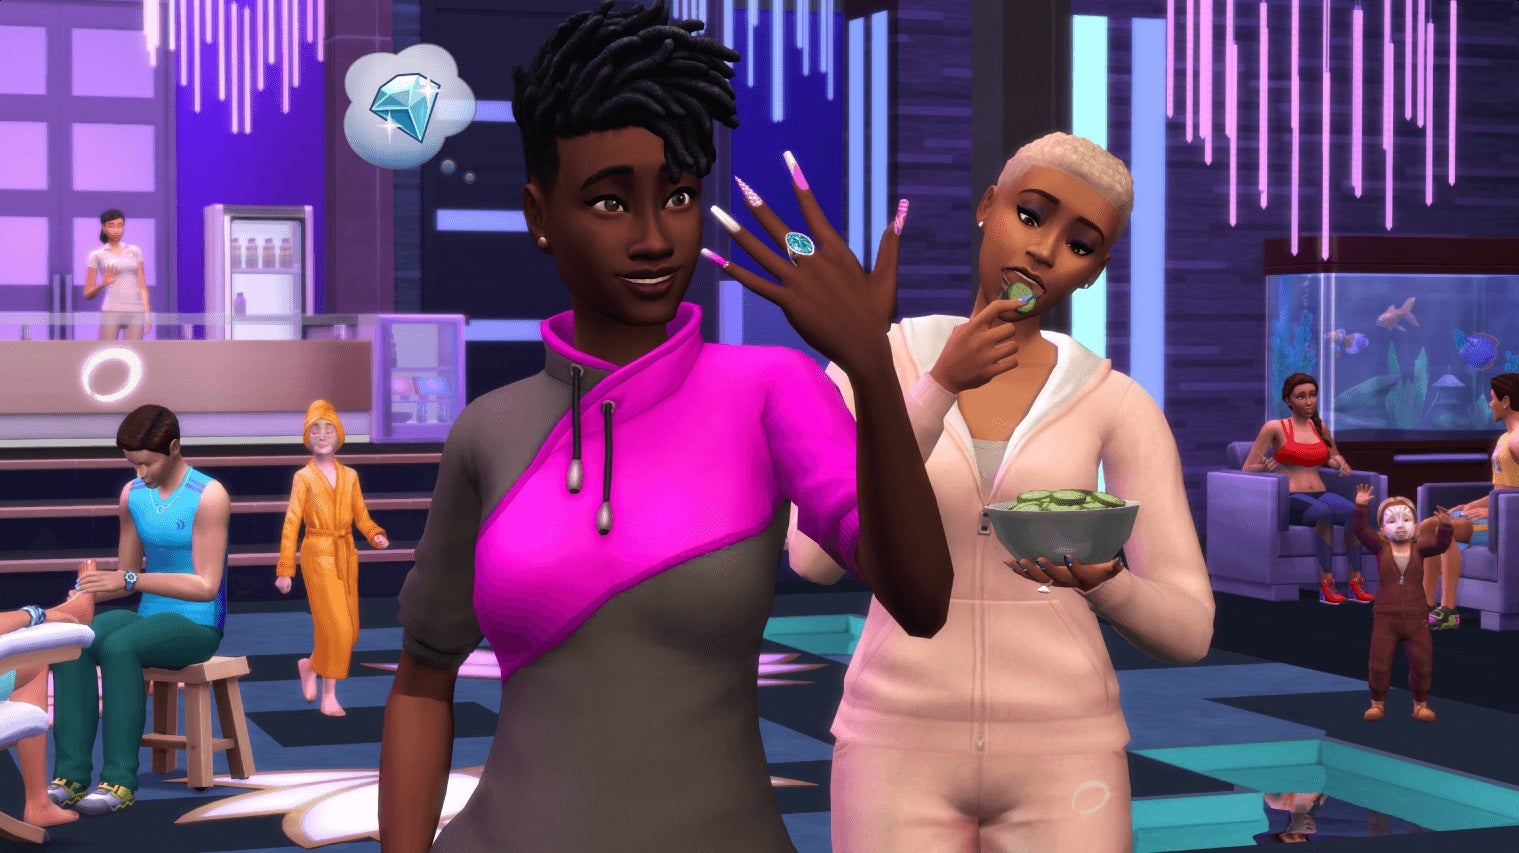 The Sims 4 Spa Day refresh - A sim looks at their nail art while wearing an athletic sweatshirt while a sim in the background eats cucumber slices wearing a tracksuit.